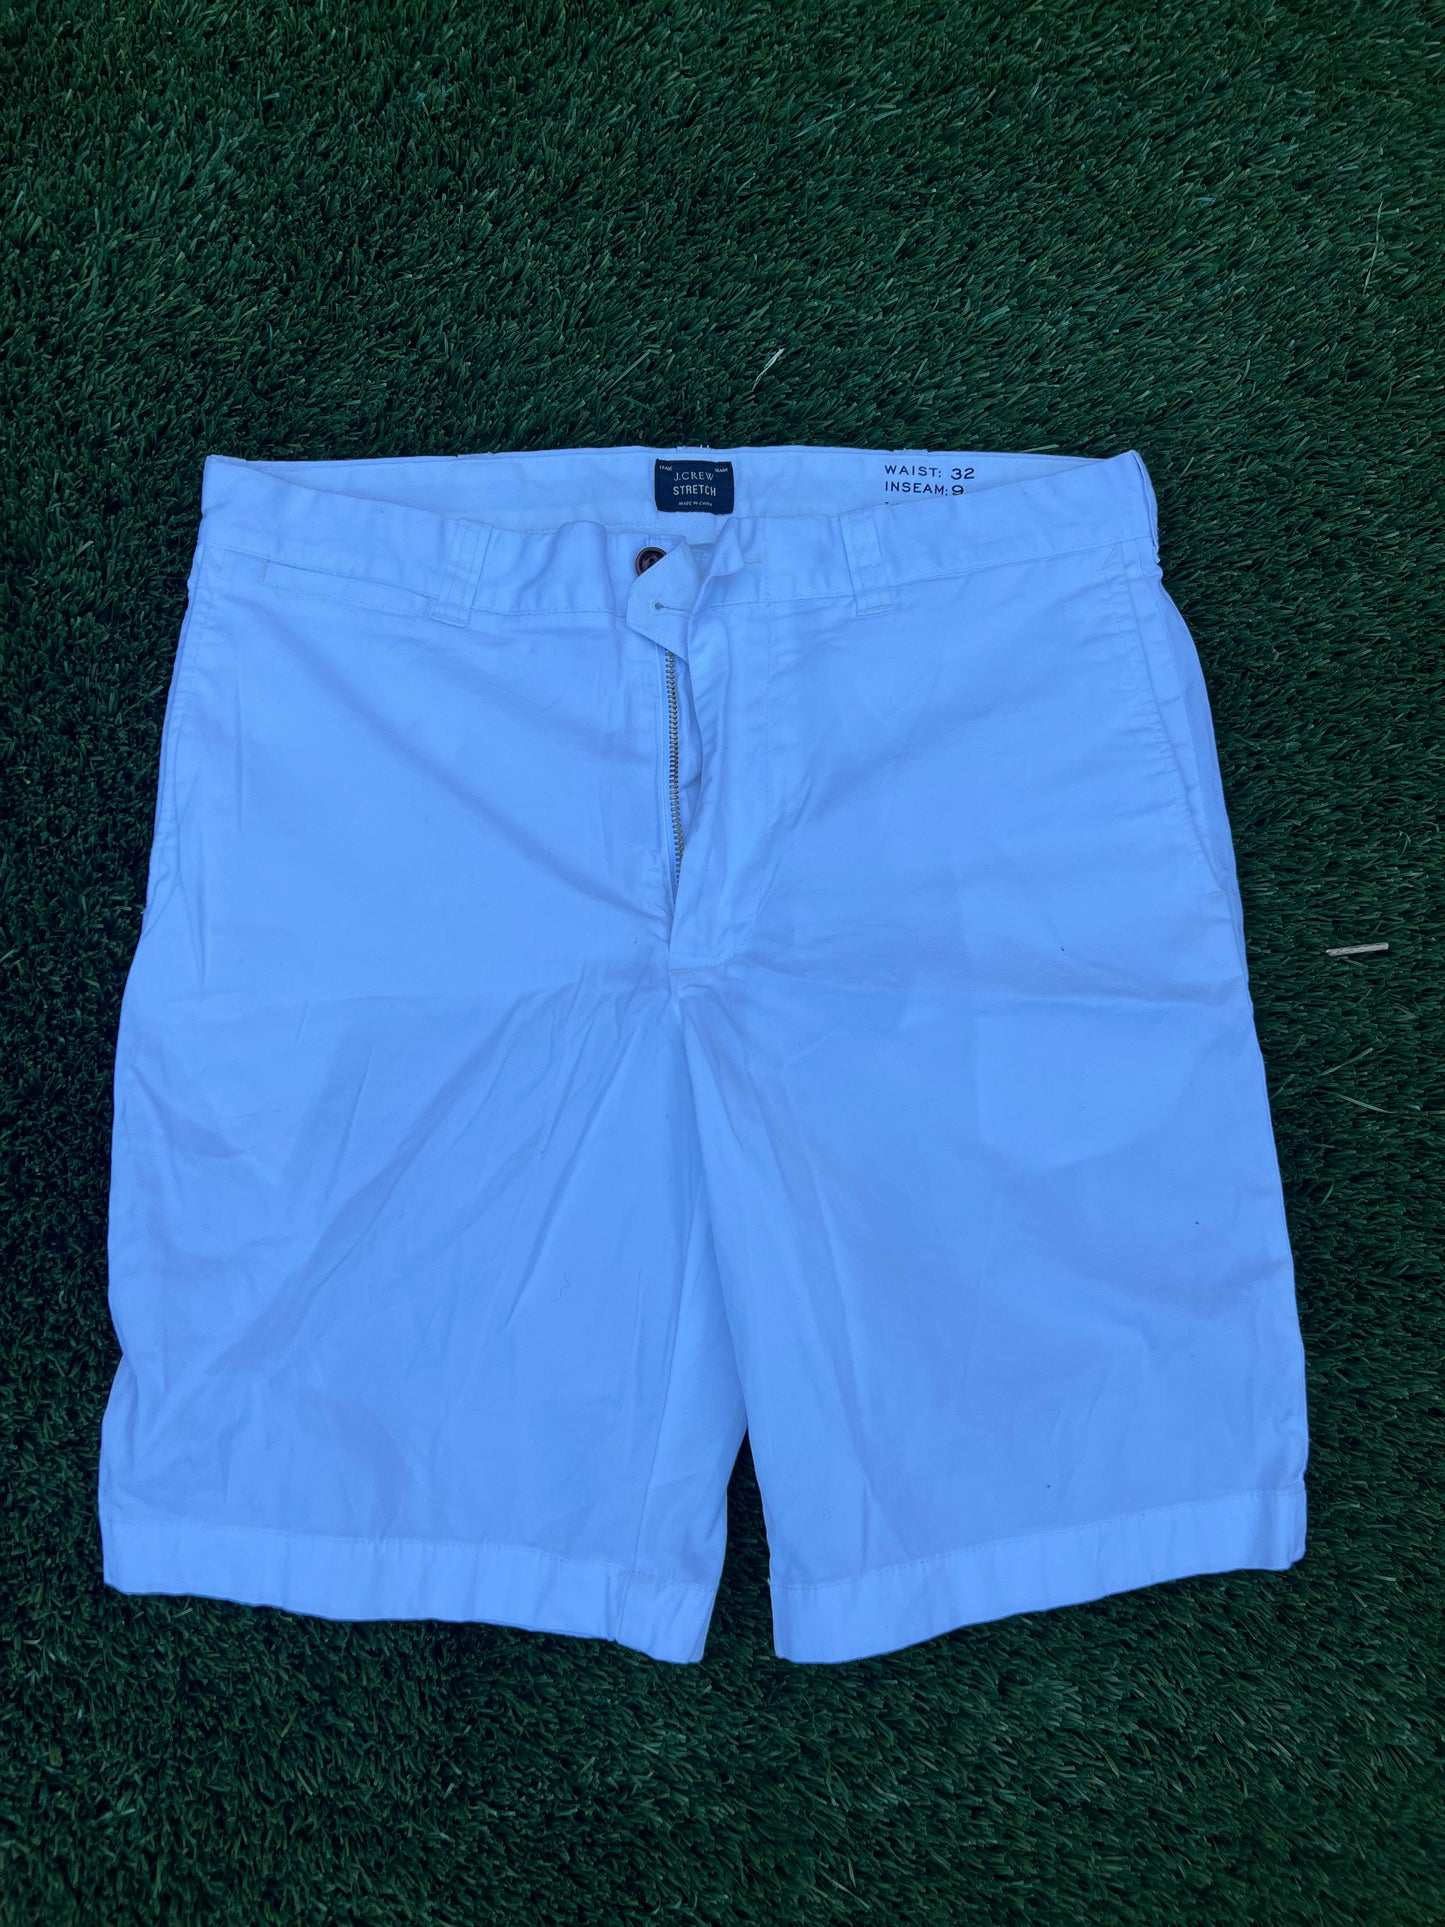 MAD MEN: Pete's White Flat Front 1960s Style Shorts (32)